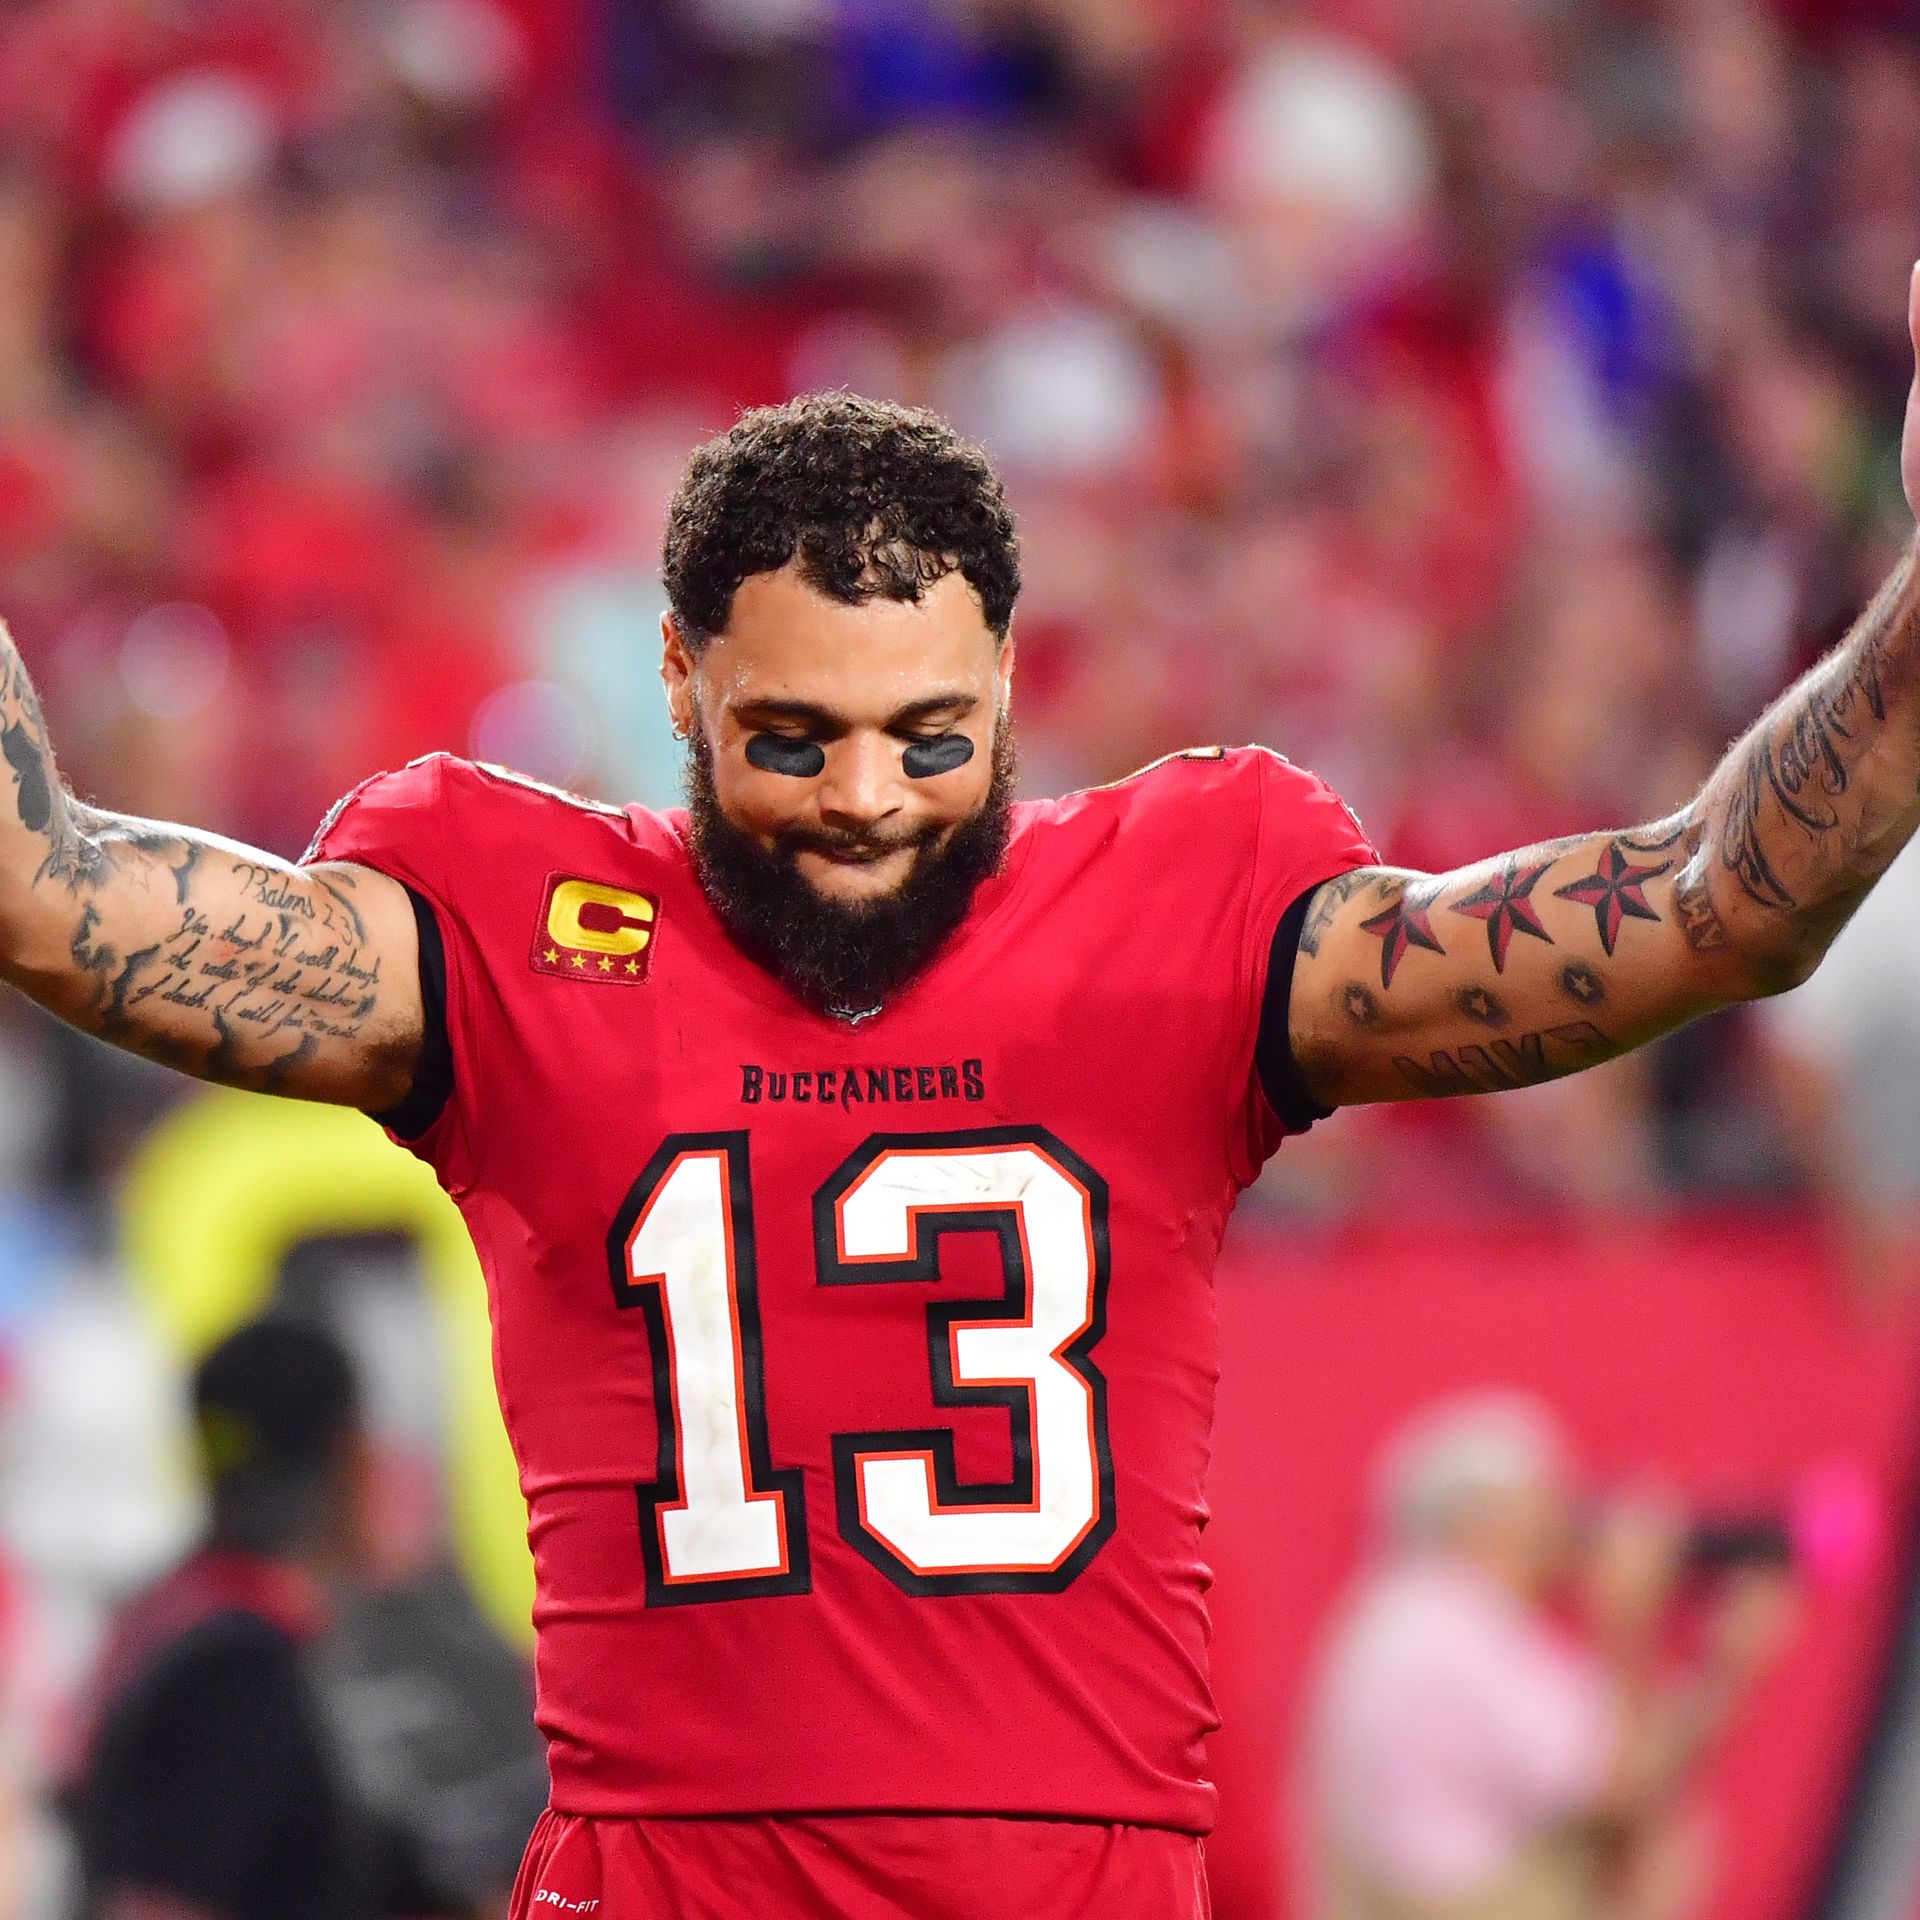 Mike Evans #13 celebrates after the Tampa Bay Buccaneers defeated the Buffalo Bills 33-27 in overtime at Raymond James Stadium on December 12, 2021 in Tampa, Florida. 